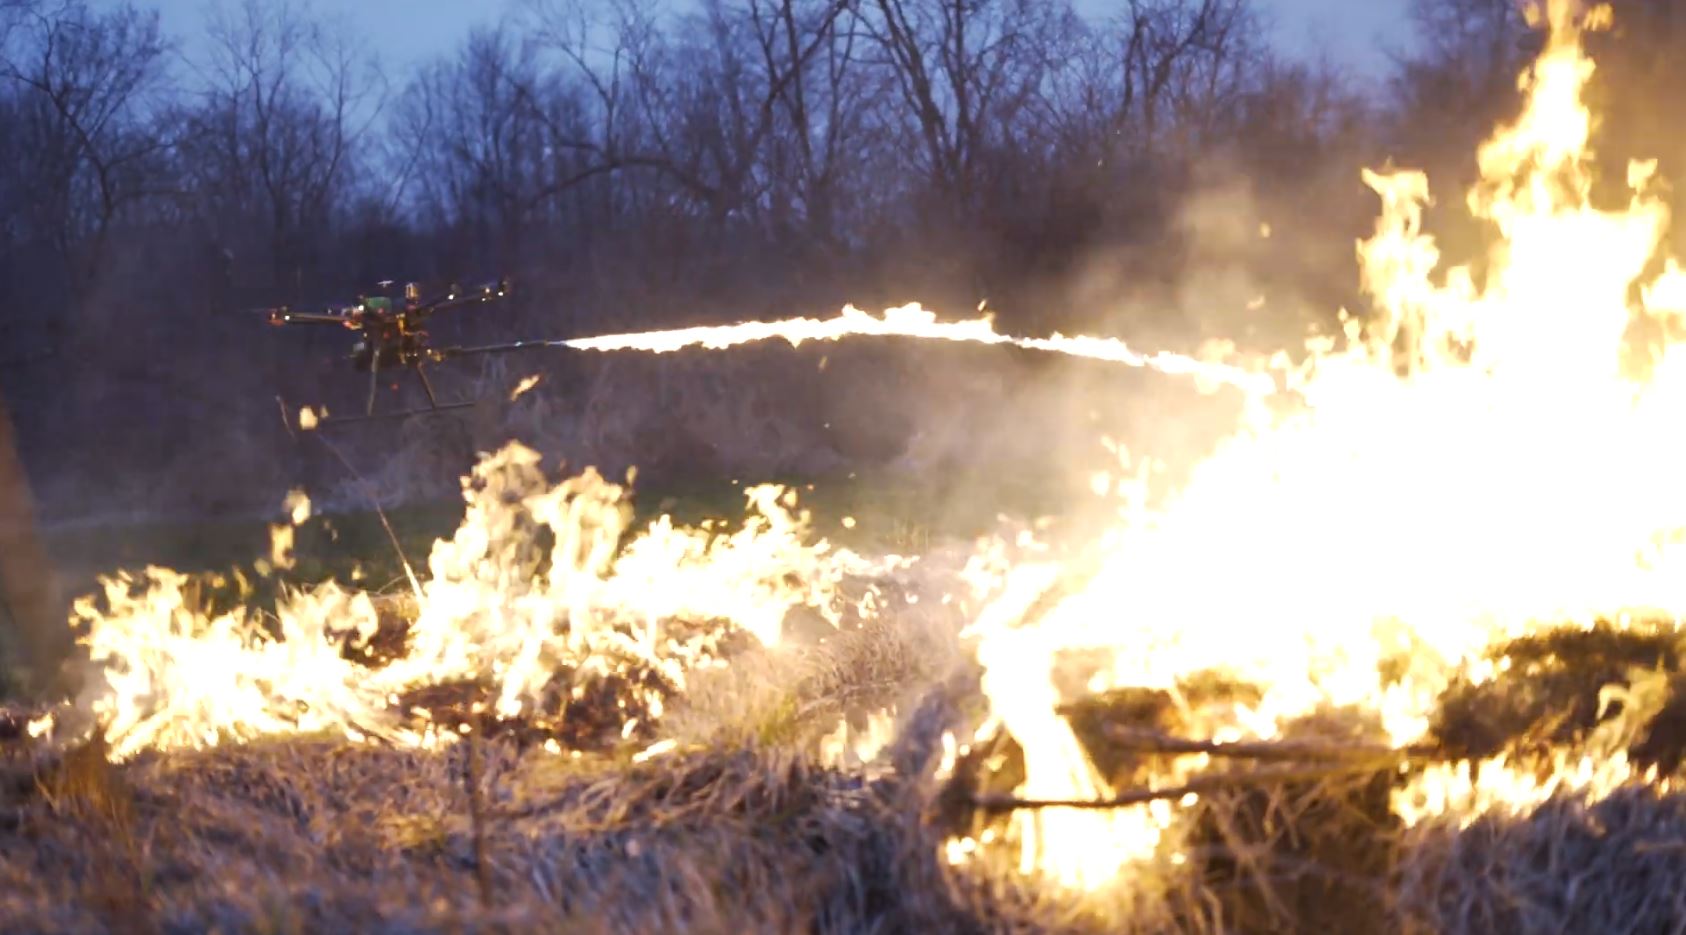 You can now buy a bloody flamethrower attachment for a drone